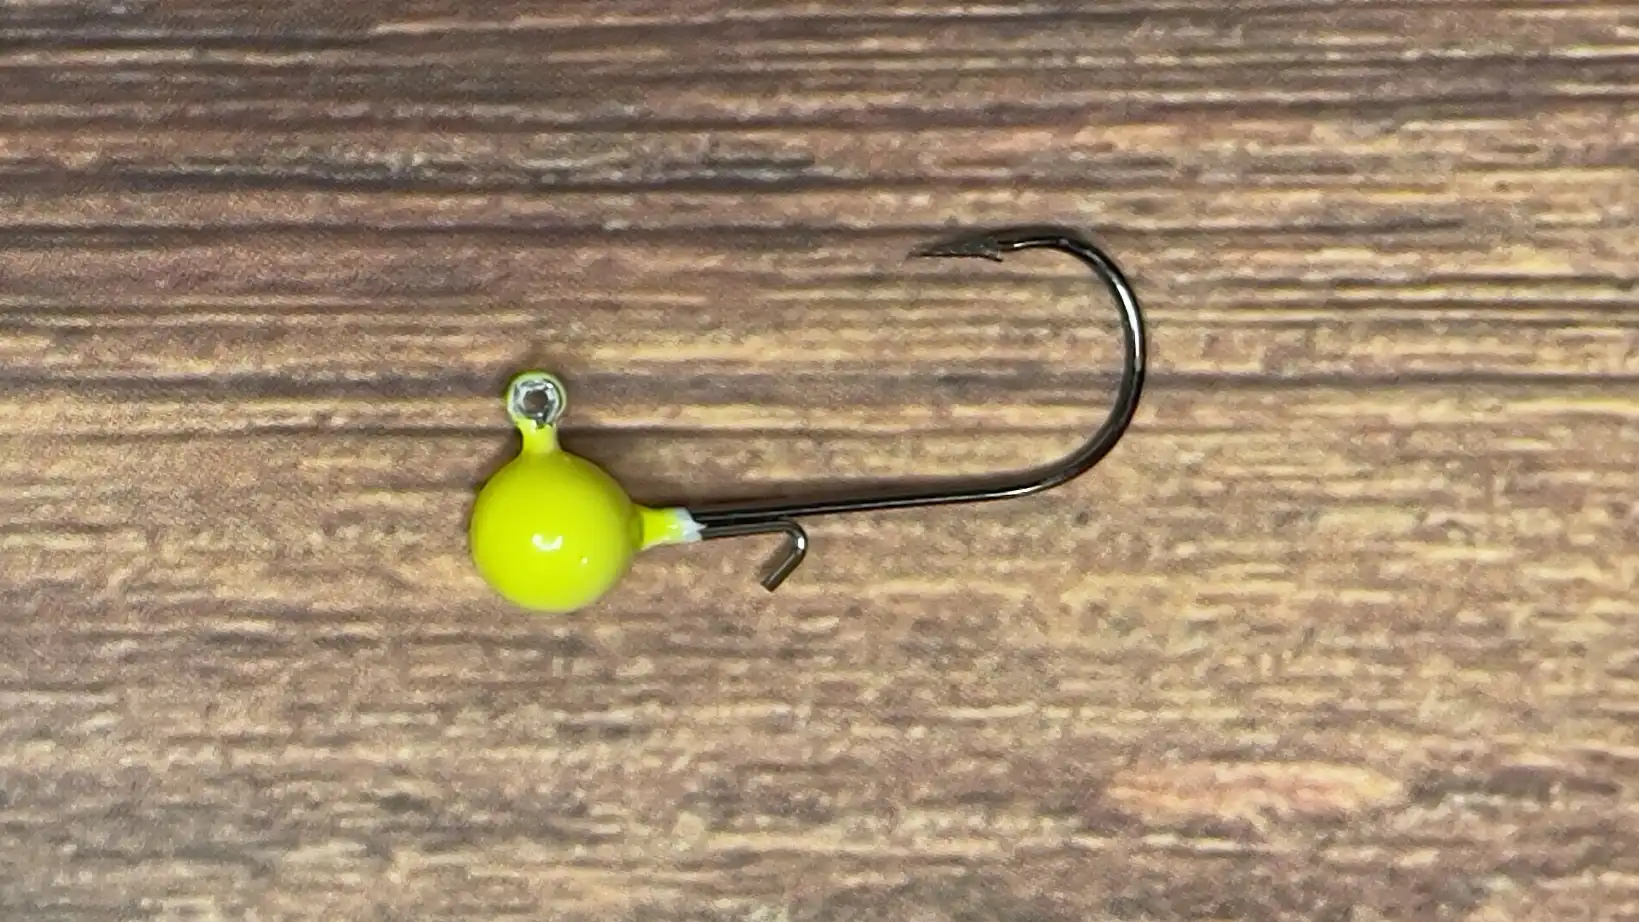 4 Reasons to Use Tungsten Ice Fishing Jigs - Wired2Fish